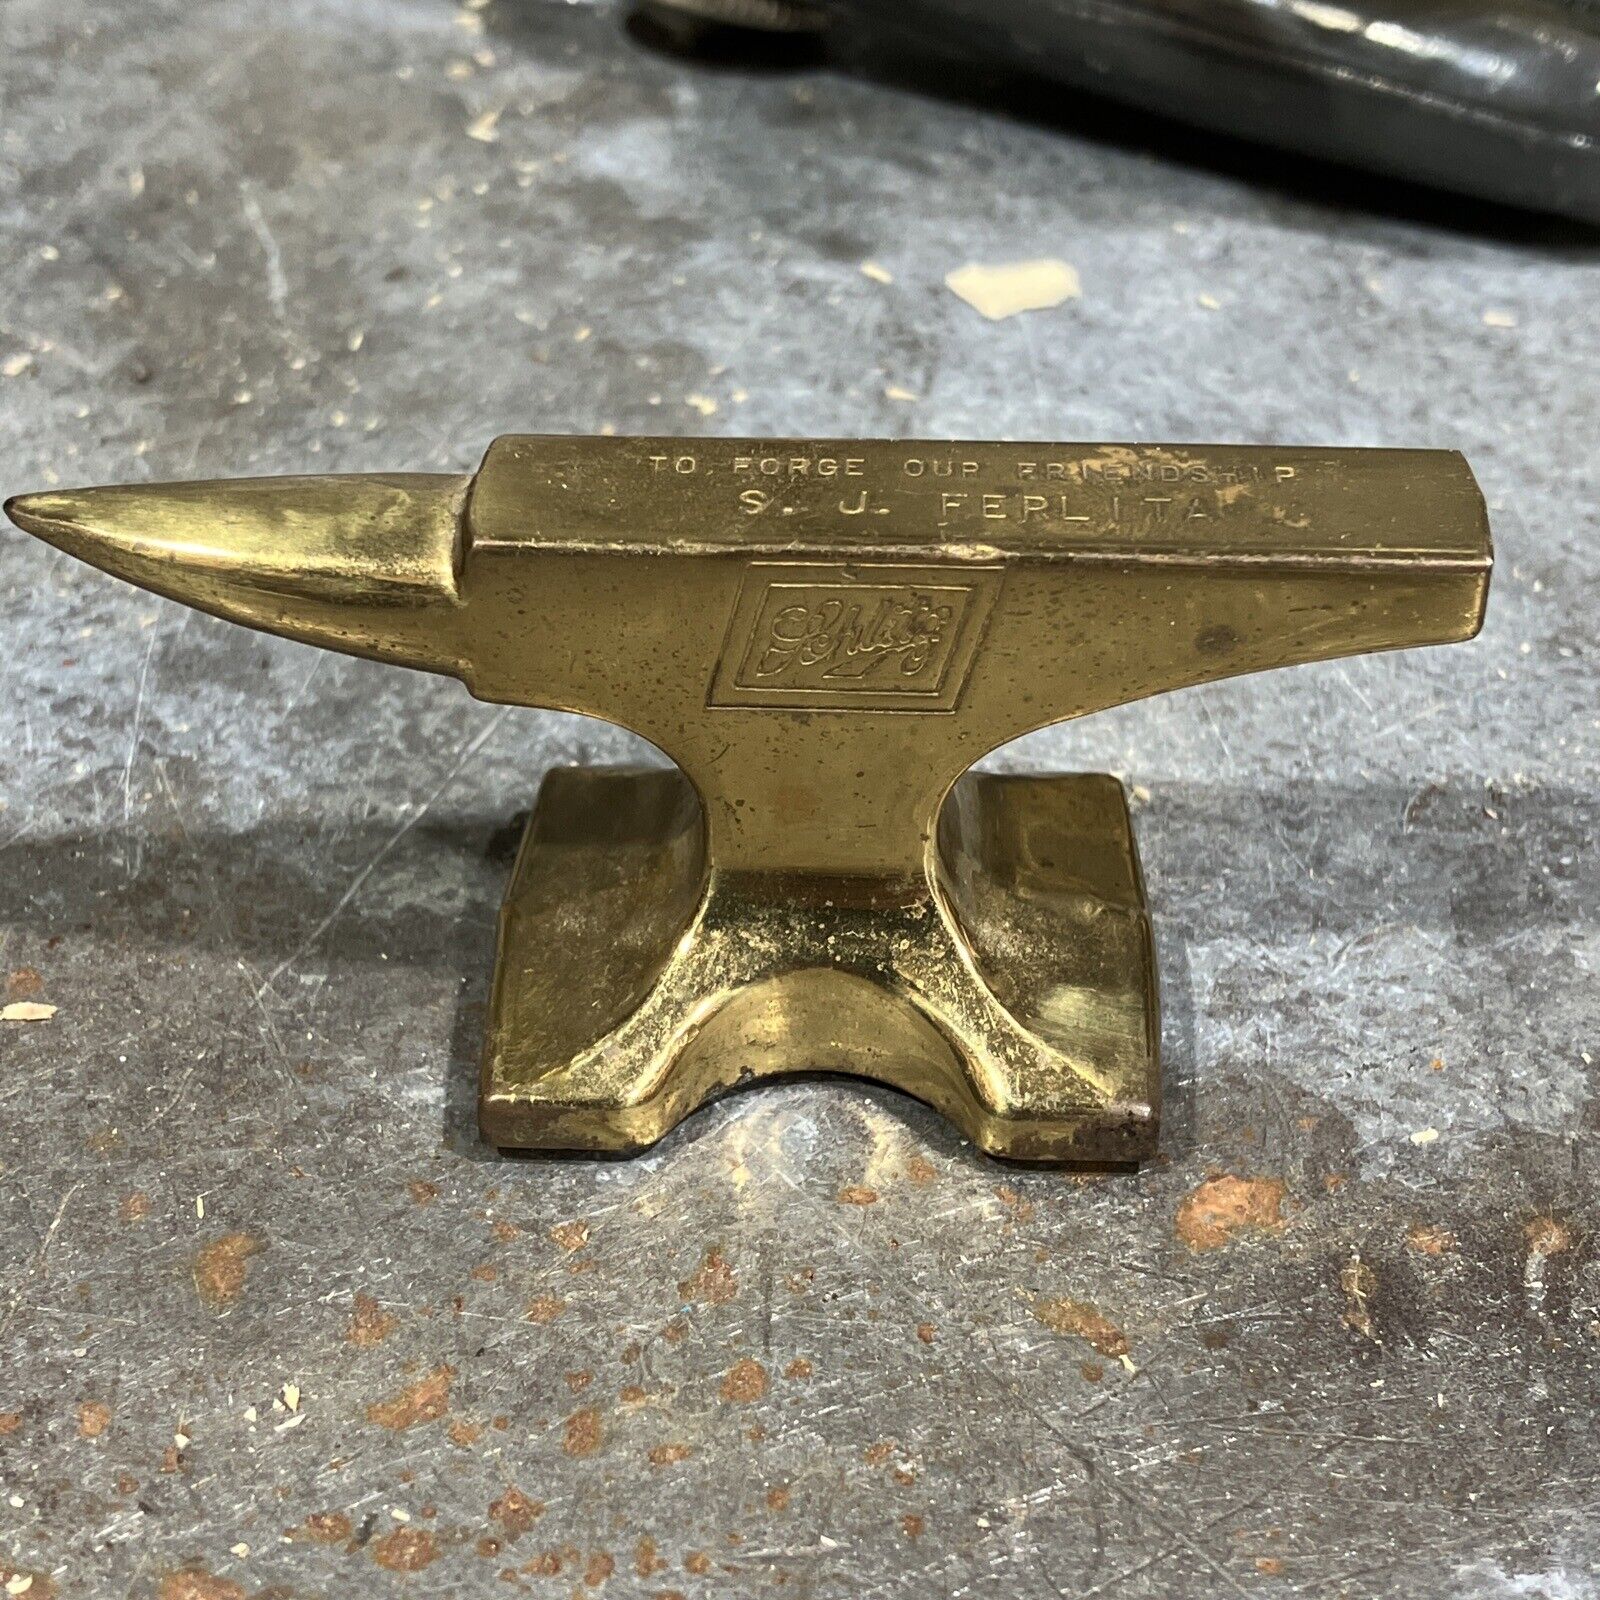 Schlitz Beer Anvil Gold Brass Rare Paperweight “To Forge Our Friendship”